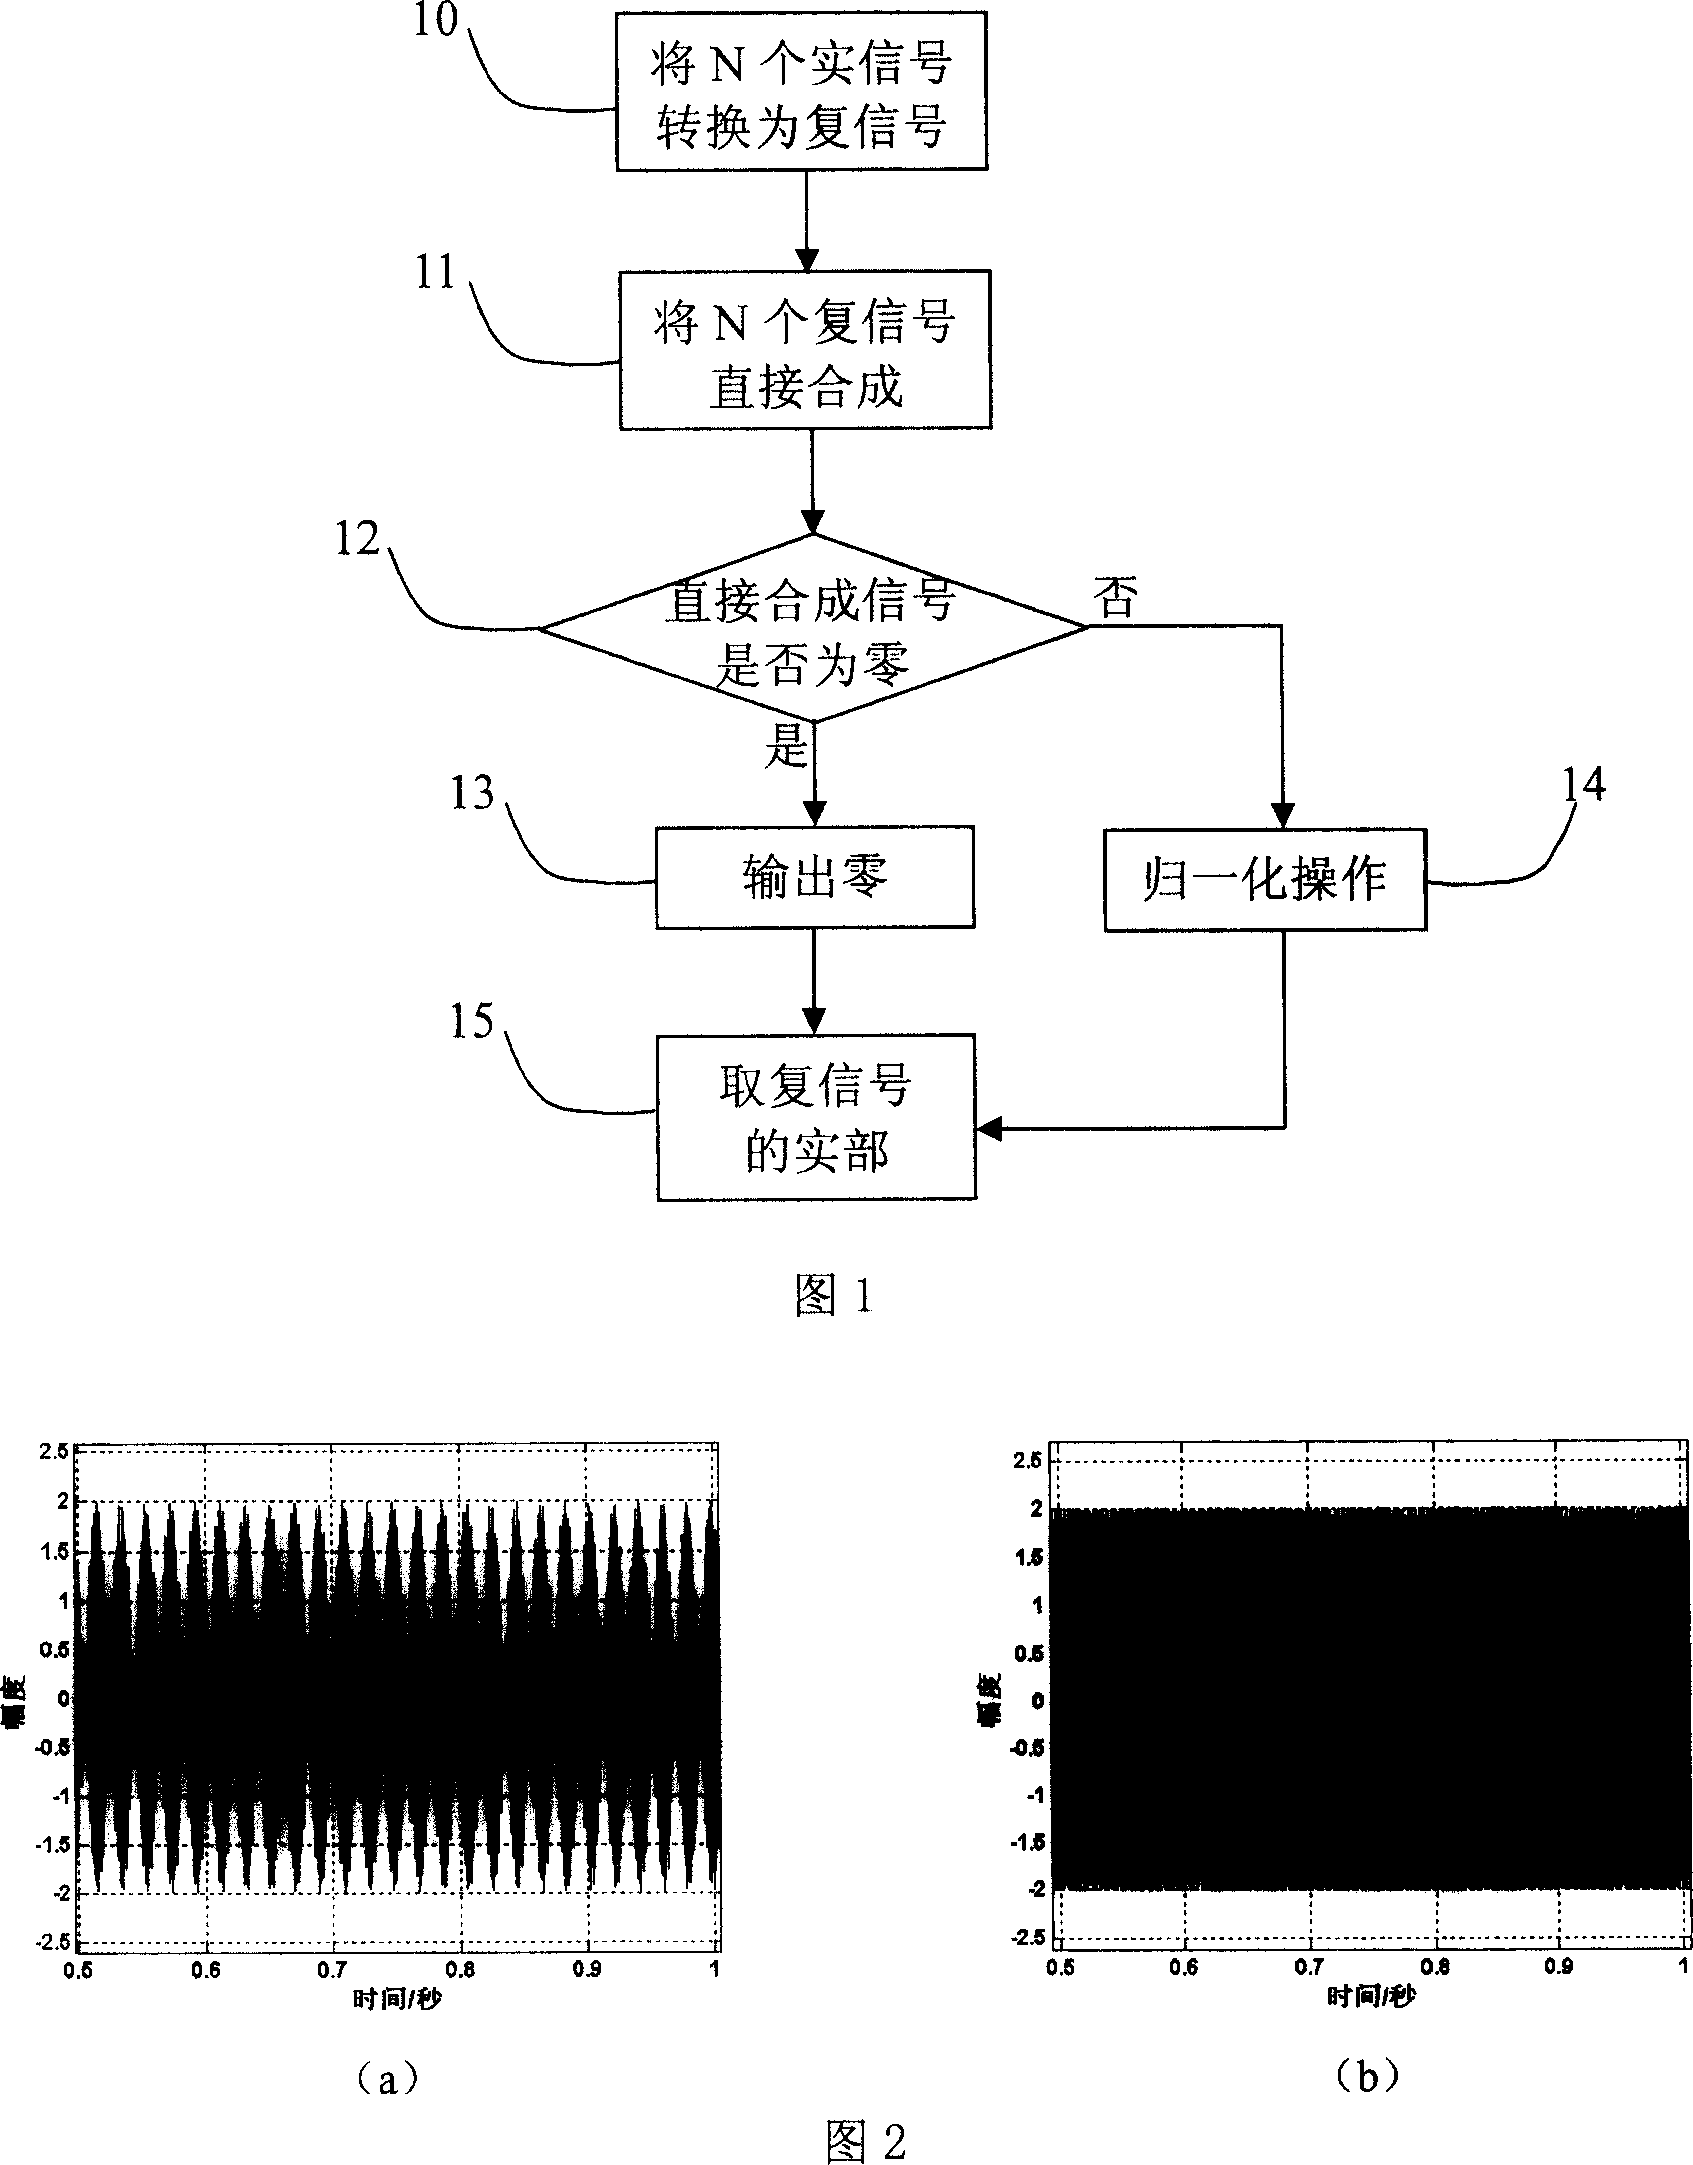 Multi-signal constant envelope synthesizing method and equipment thereof